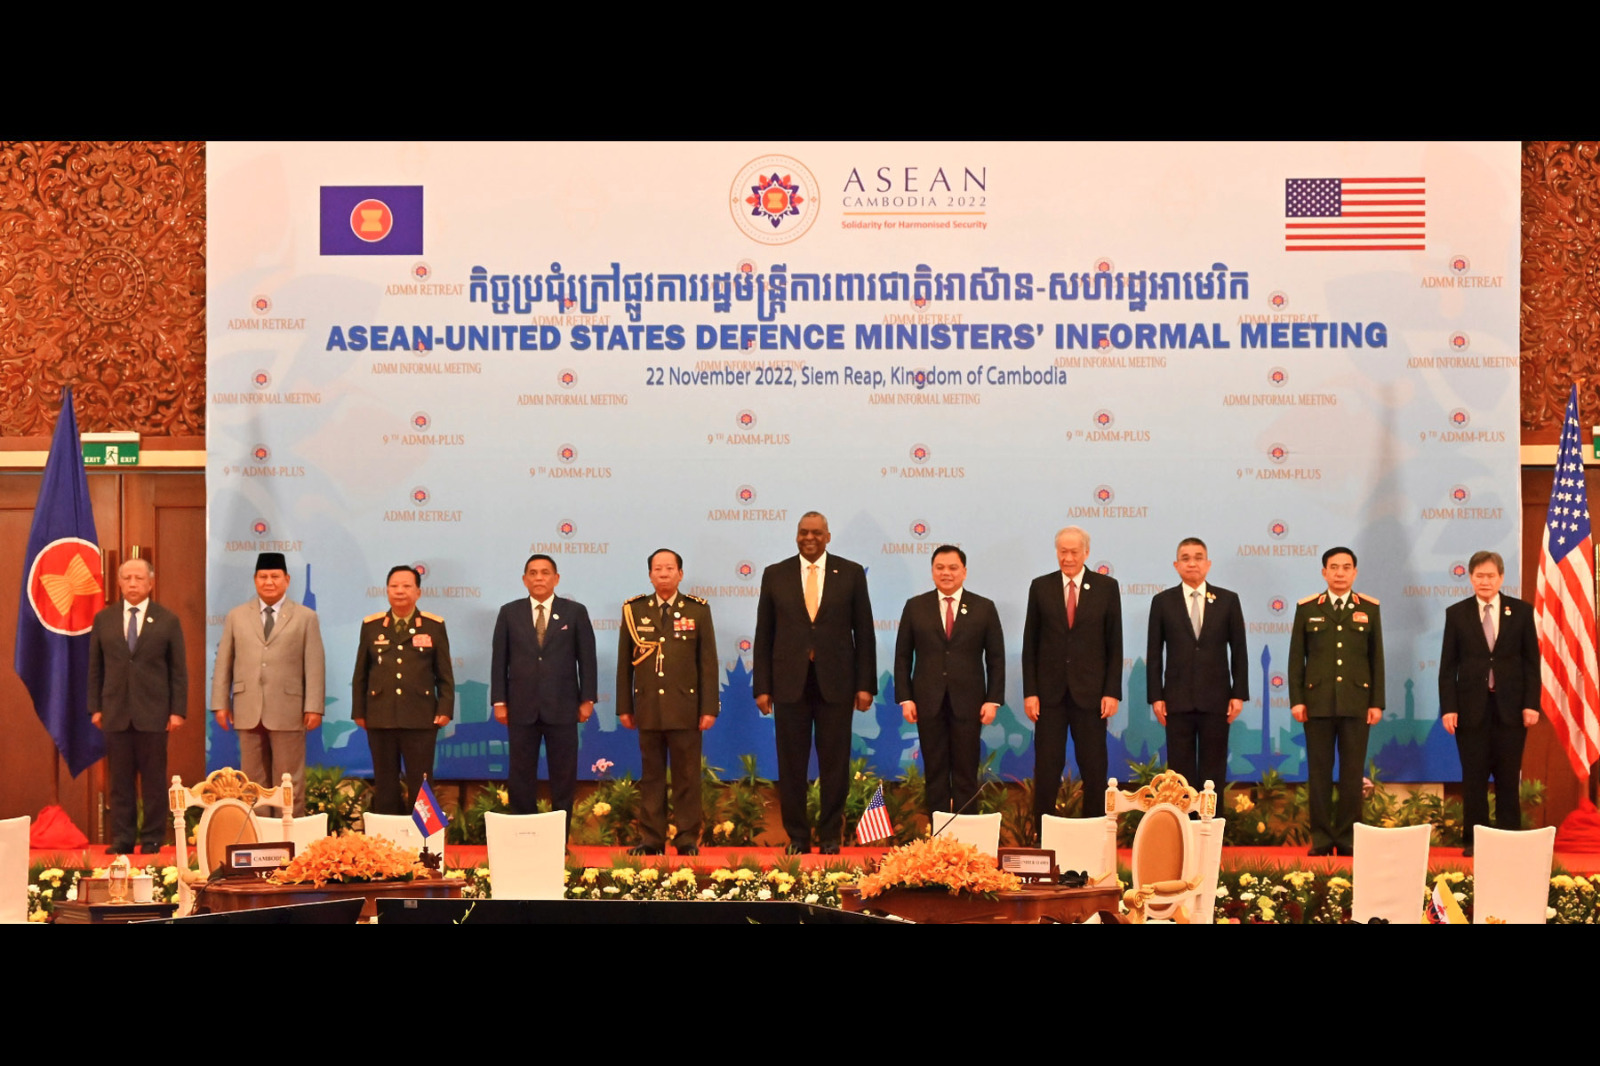 Dr Ng (fourth from right) at the ASEAN-US Defence Ministers' Informal Meeting.